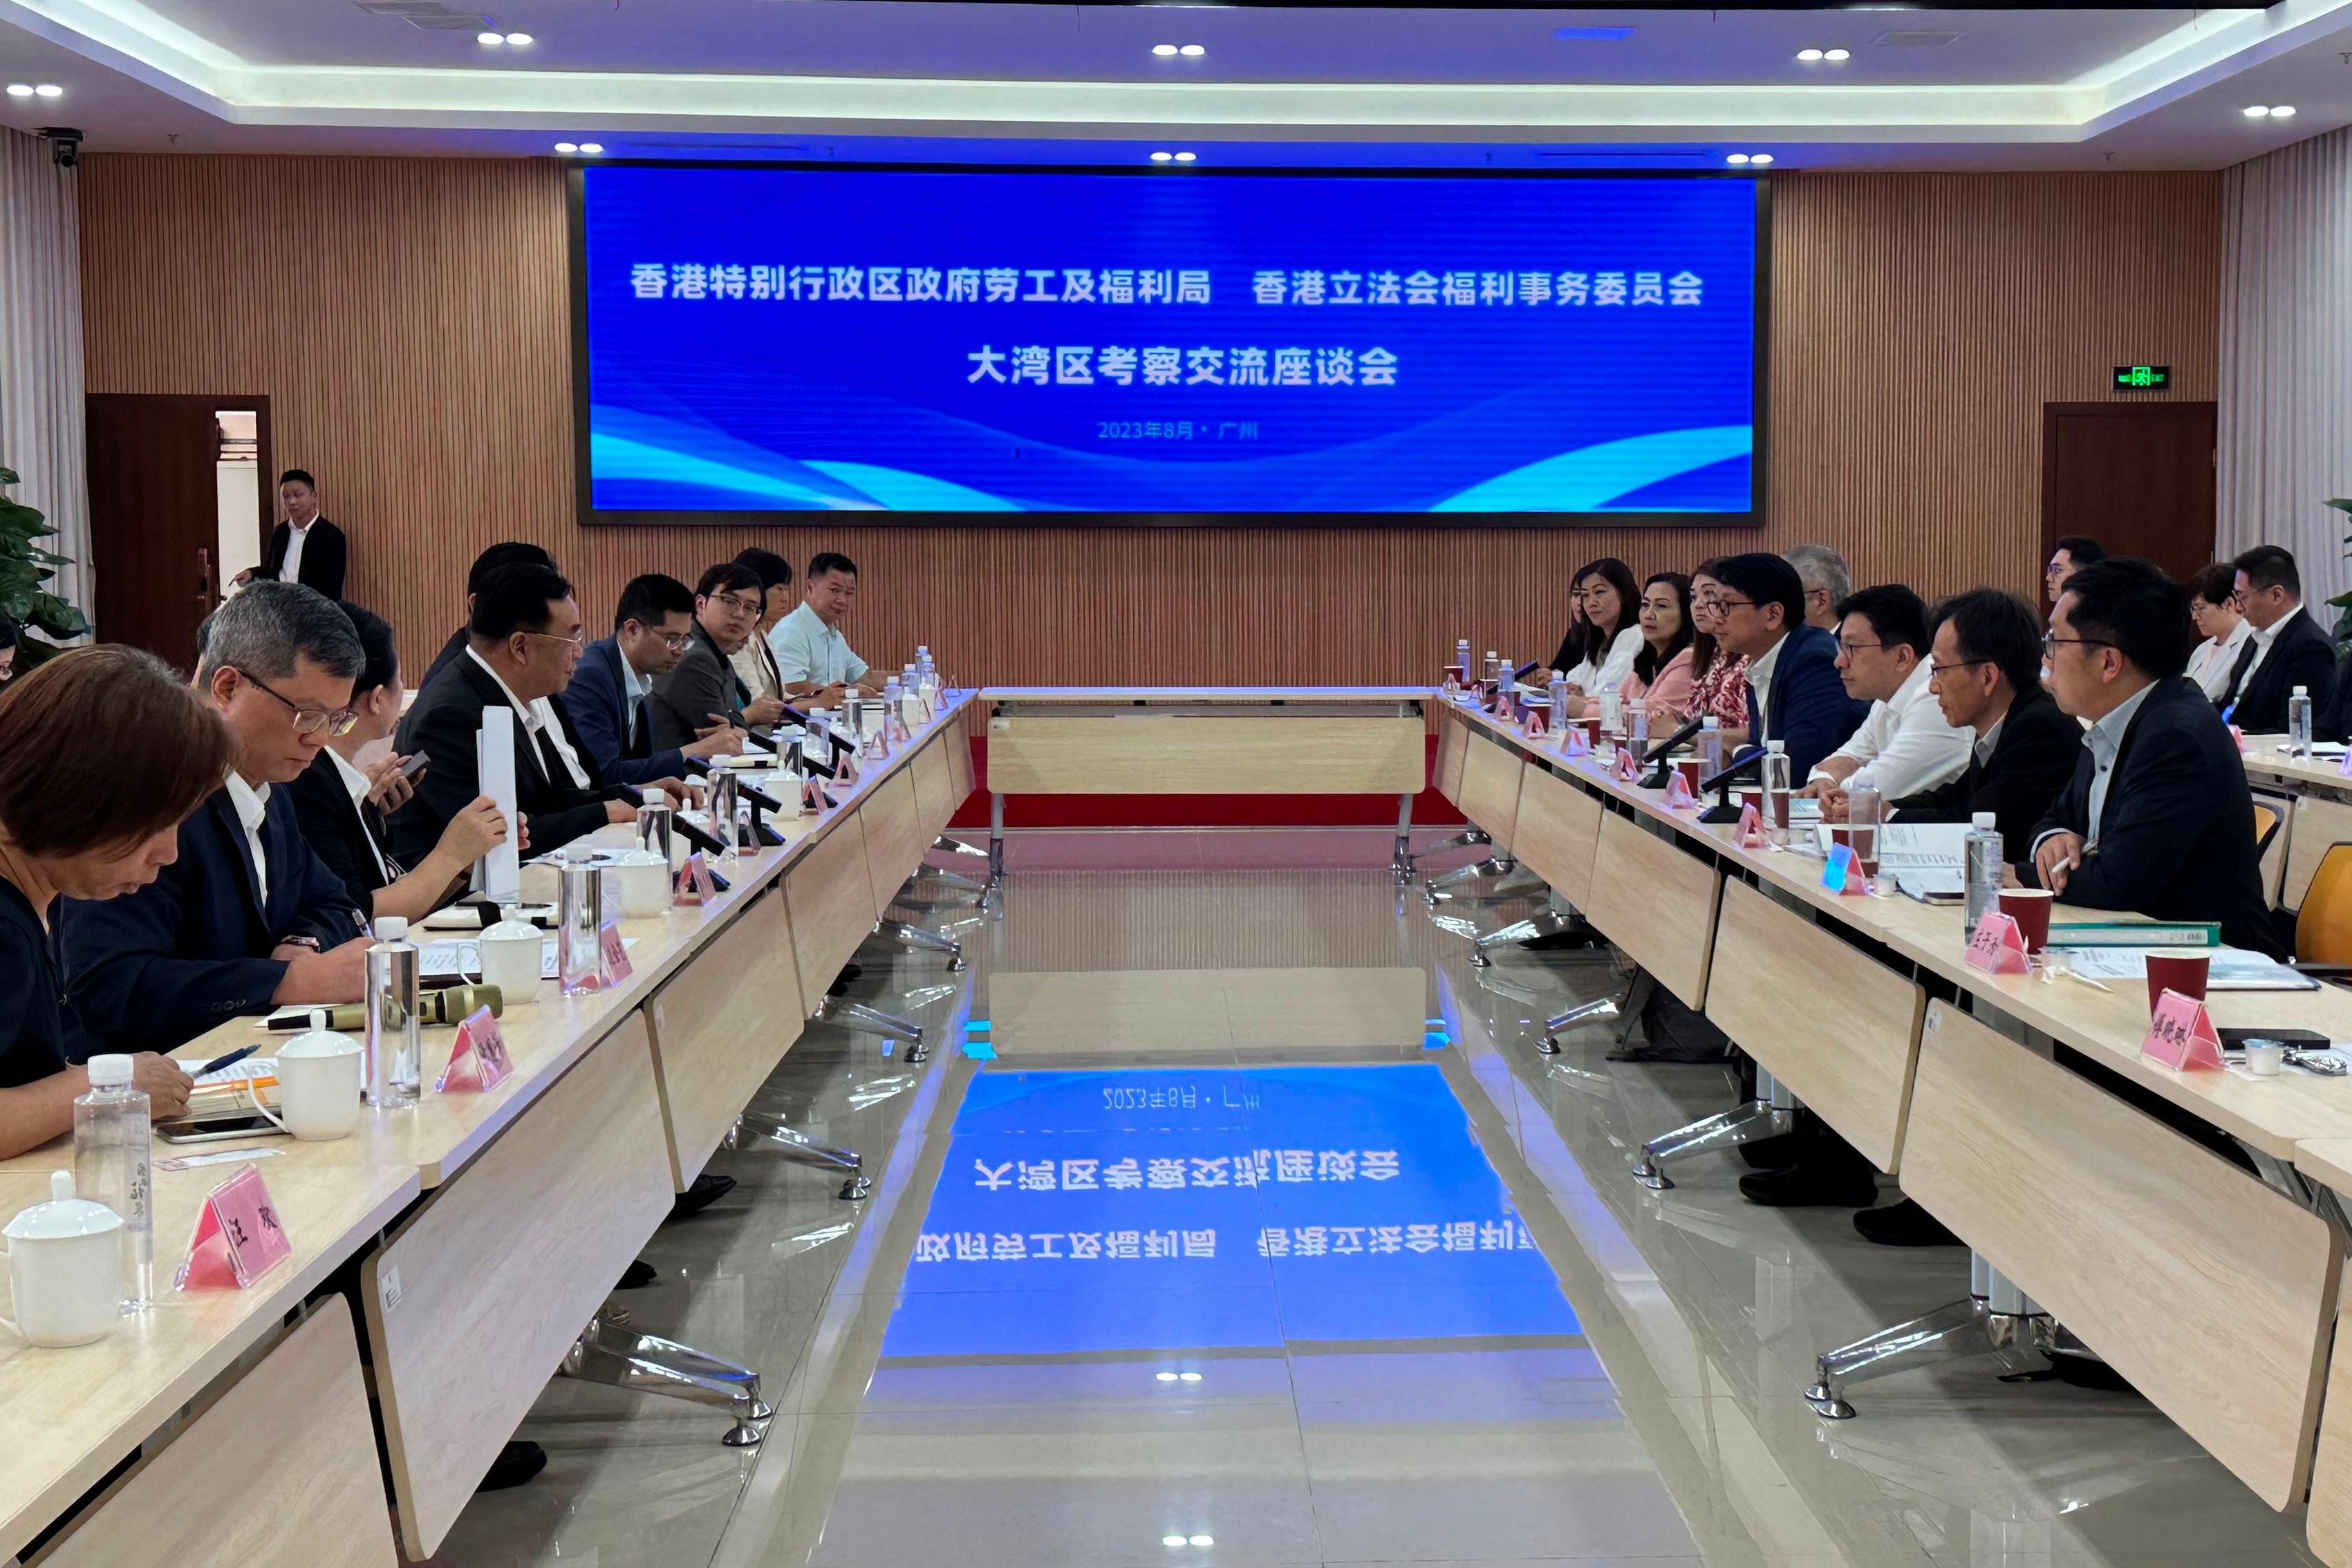 The Secretary for Labour and Welfare, Mr Chris Sun, leading a delegation of the Labour and Welfare Bureau, today (August 30) started his visit to three Mainland cities in the Guangdong-Hong Kong-Macao Greater Bay Area, together with a delegation of the Legislative Council Panel on Welfare Services. Photo shows Mr Sun (third right) in a joint seminar with the Department of Civil Affairs of Guangdong Province while in Guangzhou this afternoon, exchanging views on deepening the implementation of cross-boundary elderly care.